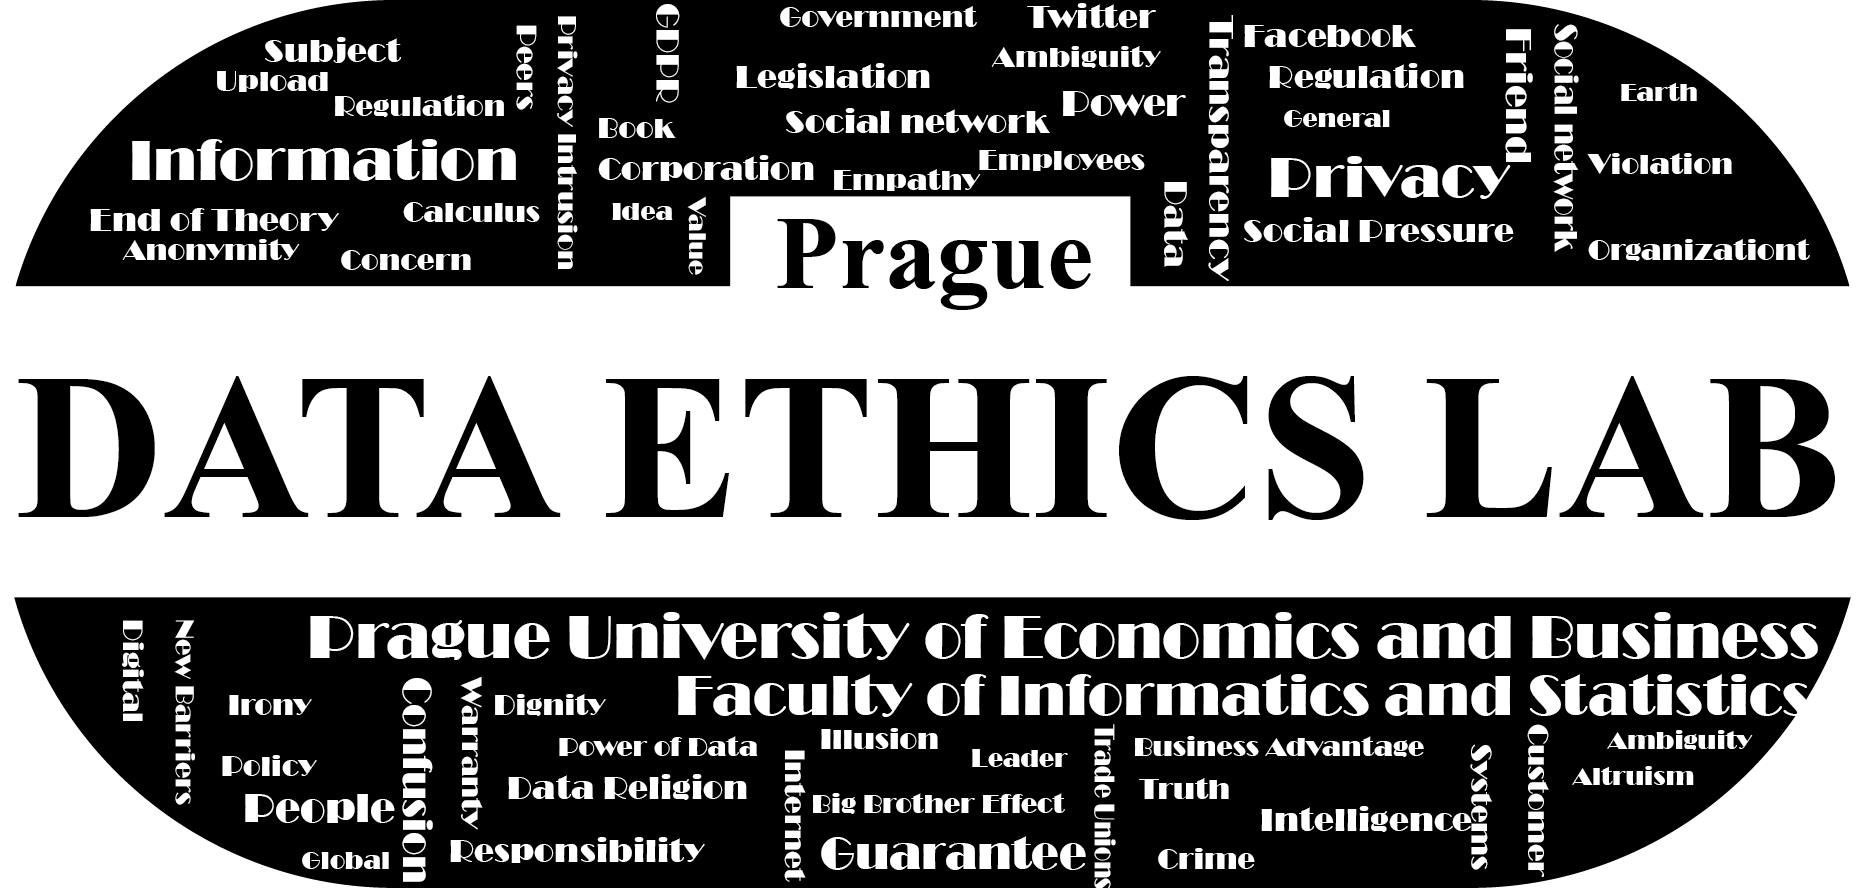 Conference System and Ethical Approaches